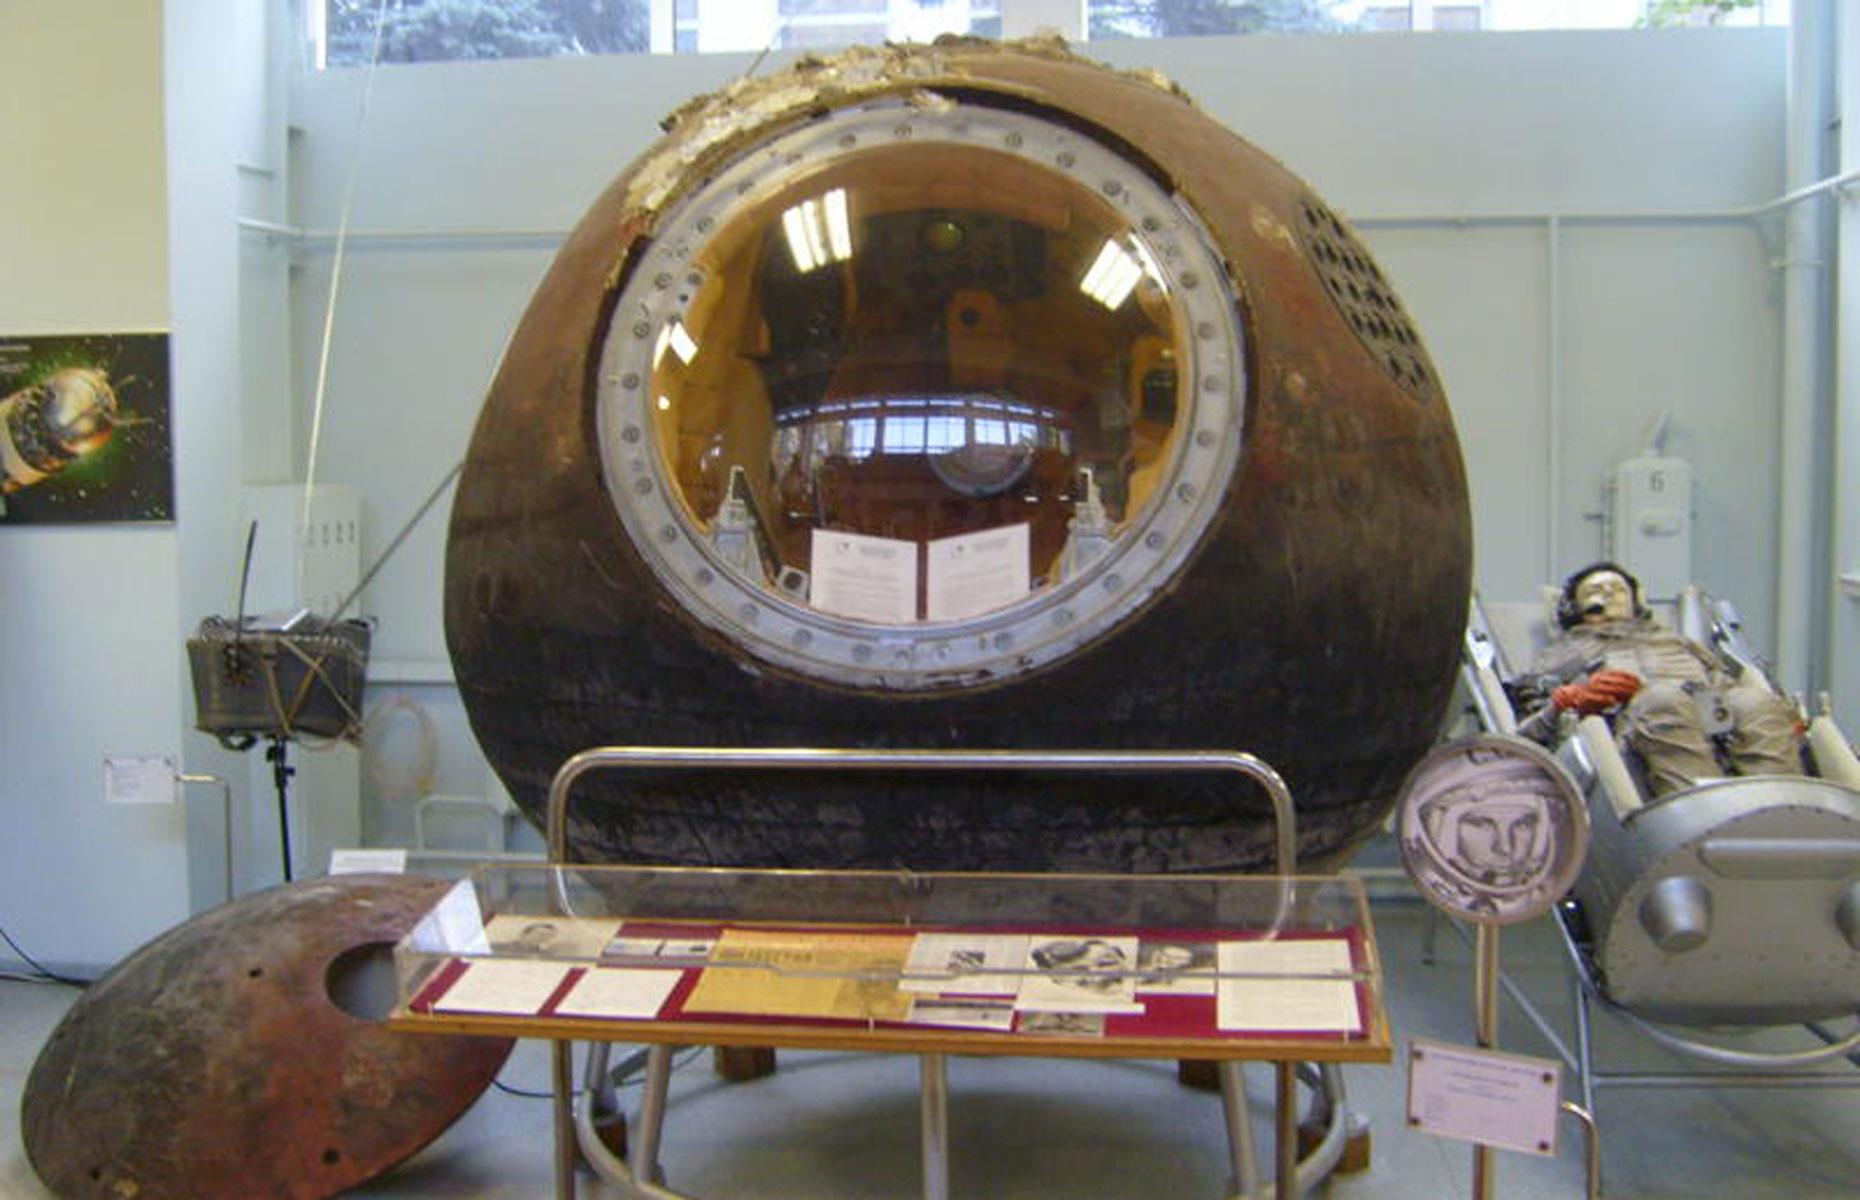 The Soviet Vostok spacecraft carrying cosmonaut Yuri Gagarin was launched at 06.07 UT on 12 April 1961 and reached Earth's orbit, making Gagarin the first human in space. The craft re-entered the atmosphere at 07.35 UT and landed in Engels, USSR. It is now on display at Korolyov's RKK Energiya museum.